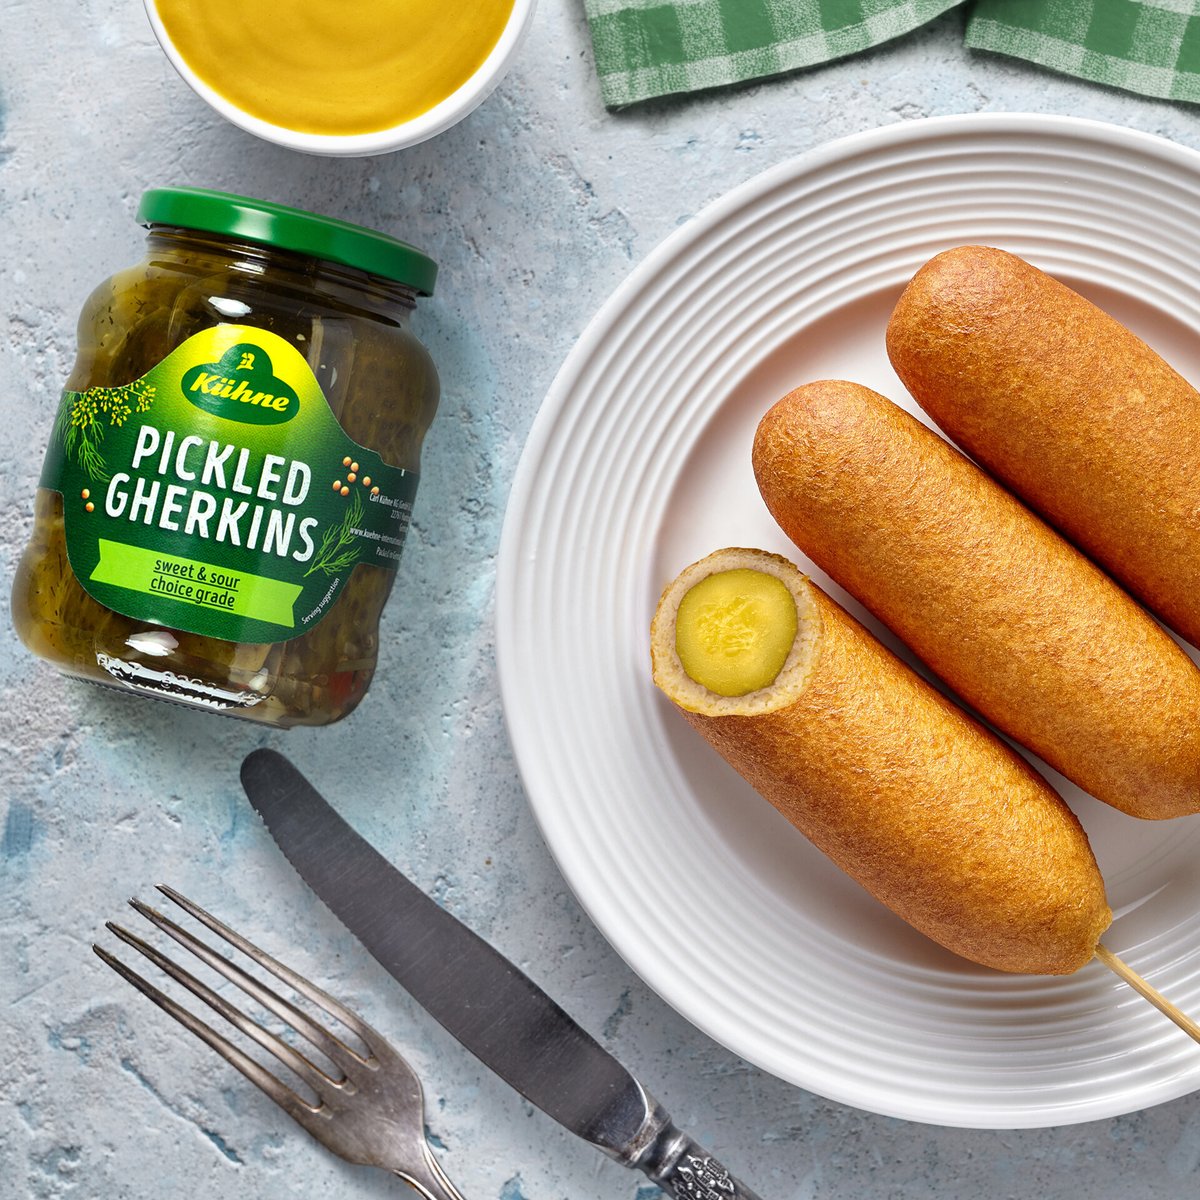 Corndogs with a pickled twist 🥒 And of course, a side of Medium Hot Mustard 🤤 #corndogs #pickle #gherkins